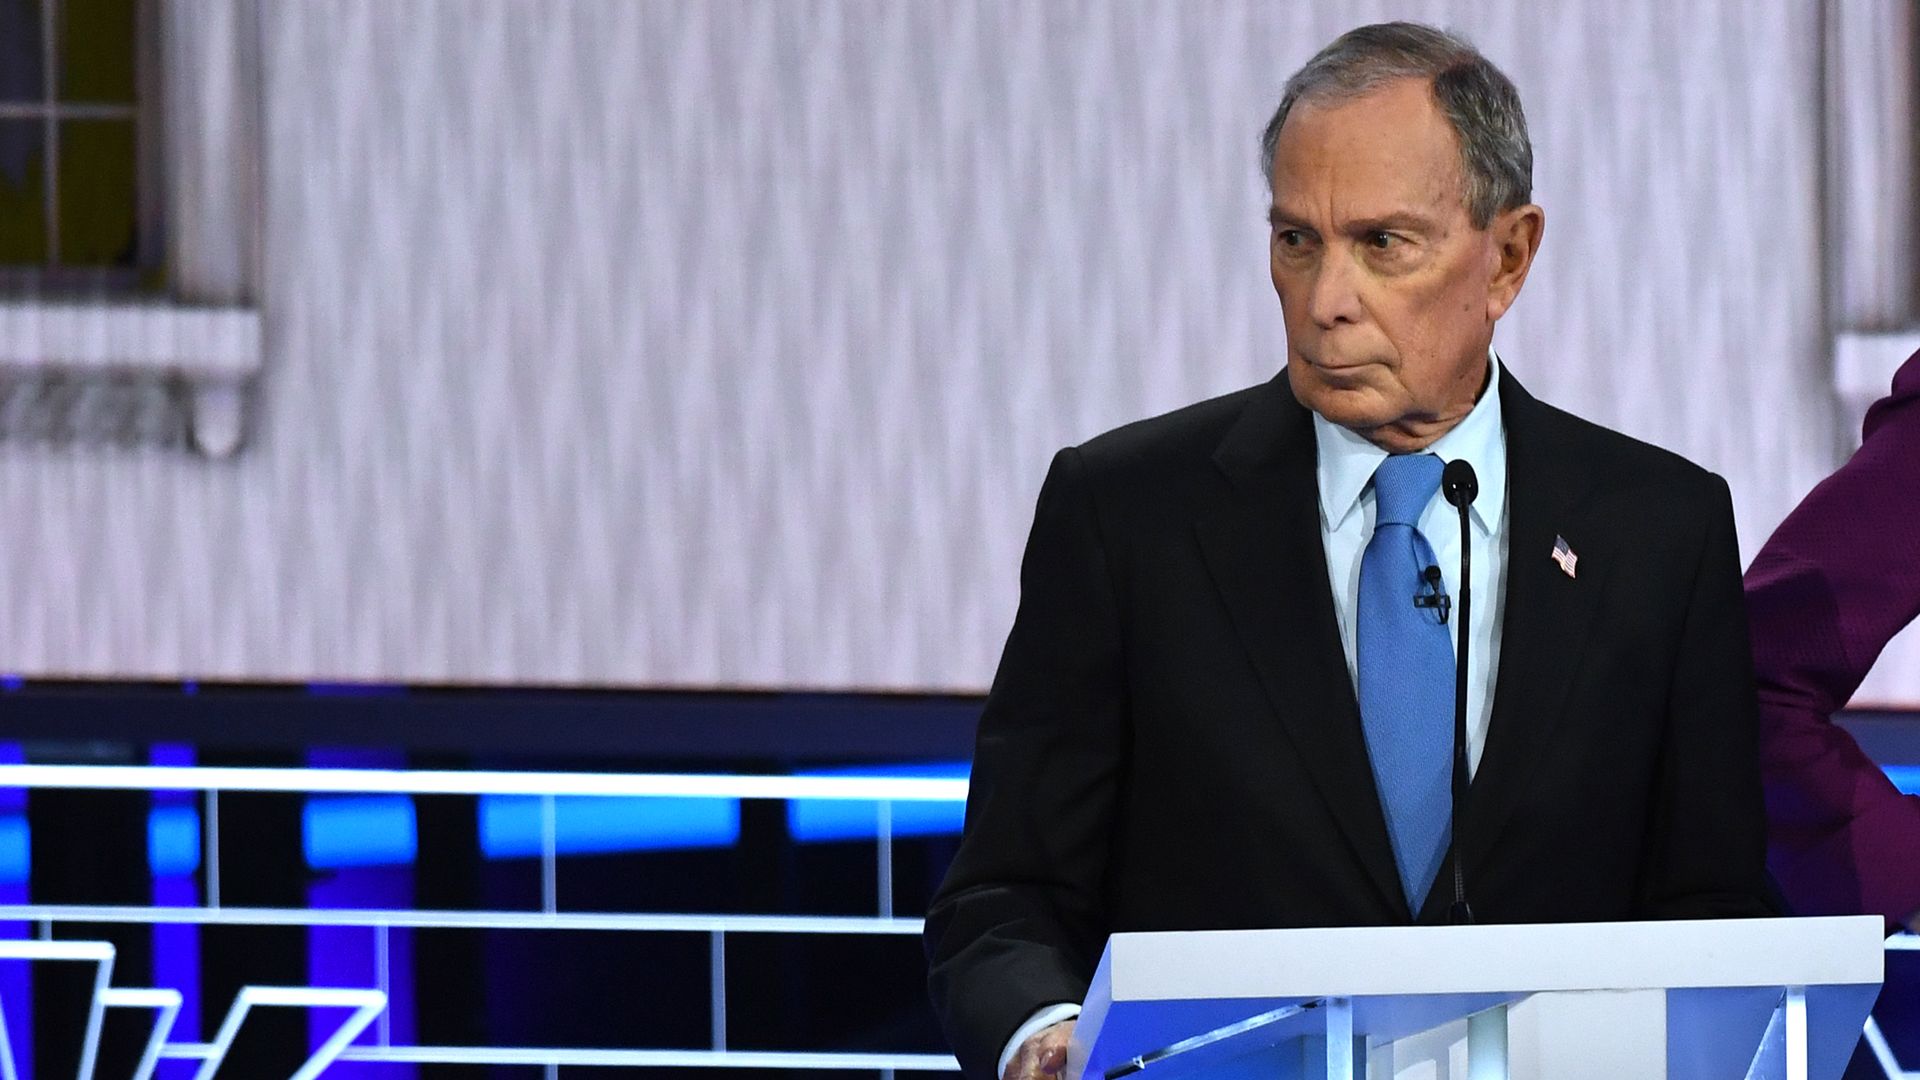 In this image, Michael Bloomberg stands on the debate stage